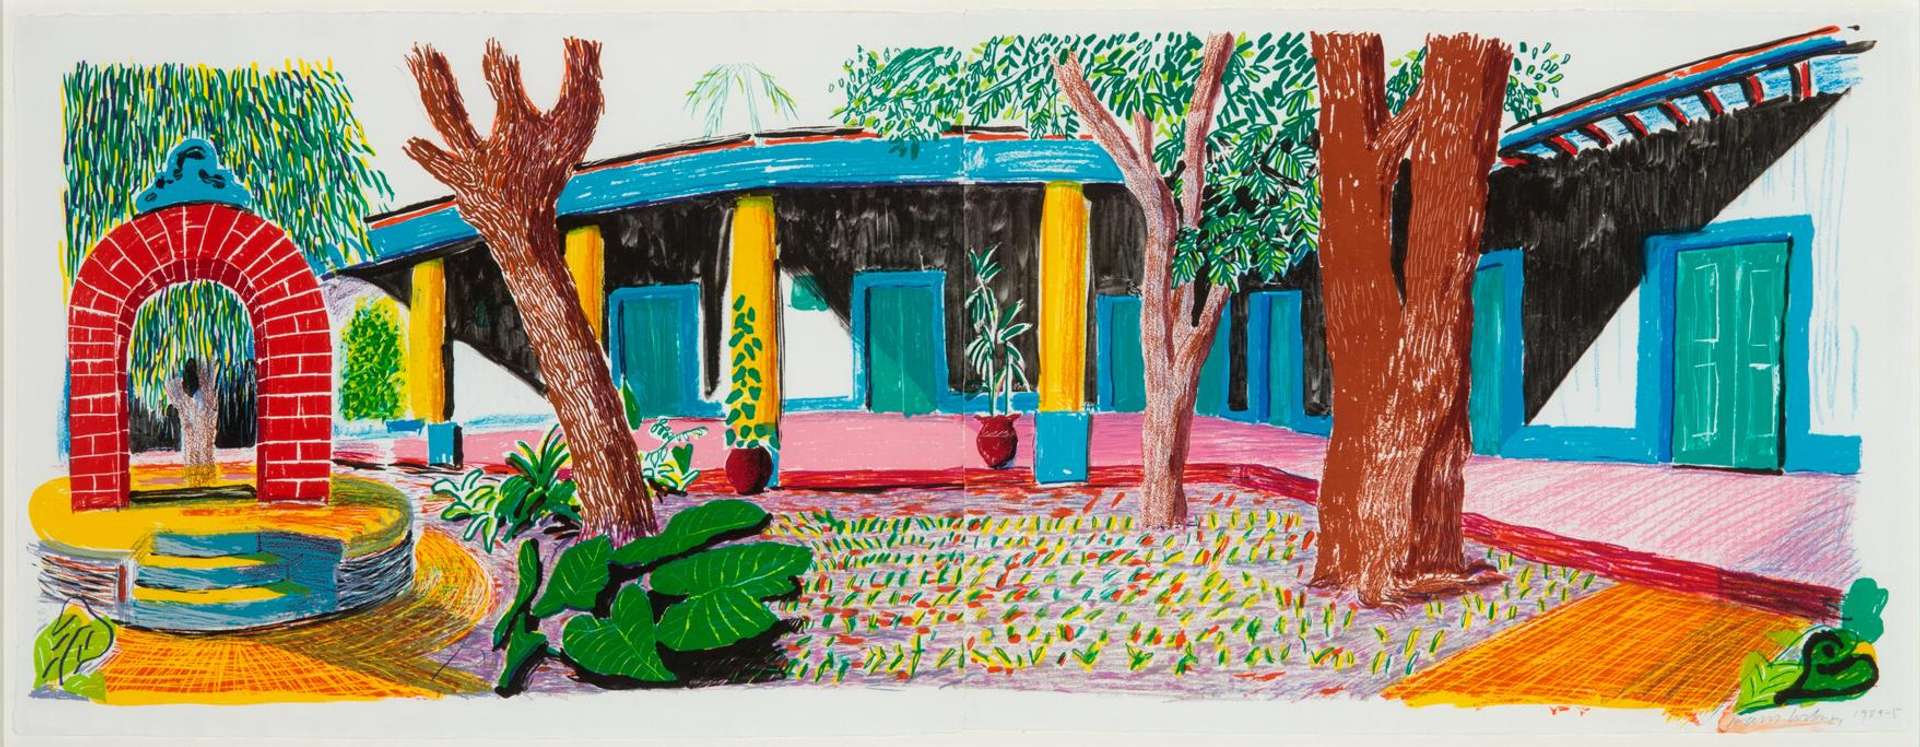 David Hockney’s Hotel Acatlán: Second Day. A lithographic print of an exterior view of Hotel Acatlán from the courtyard. 